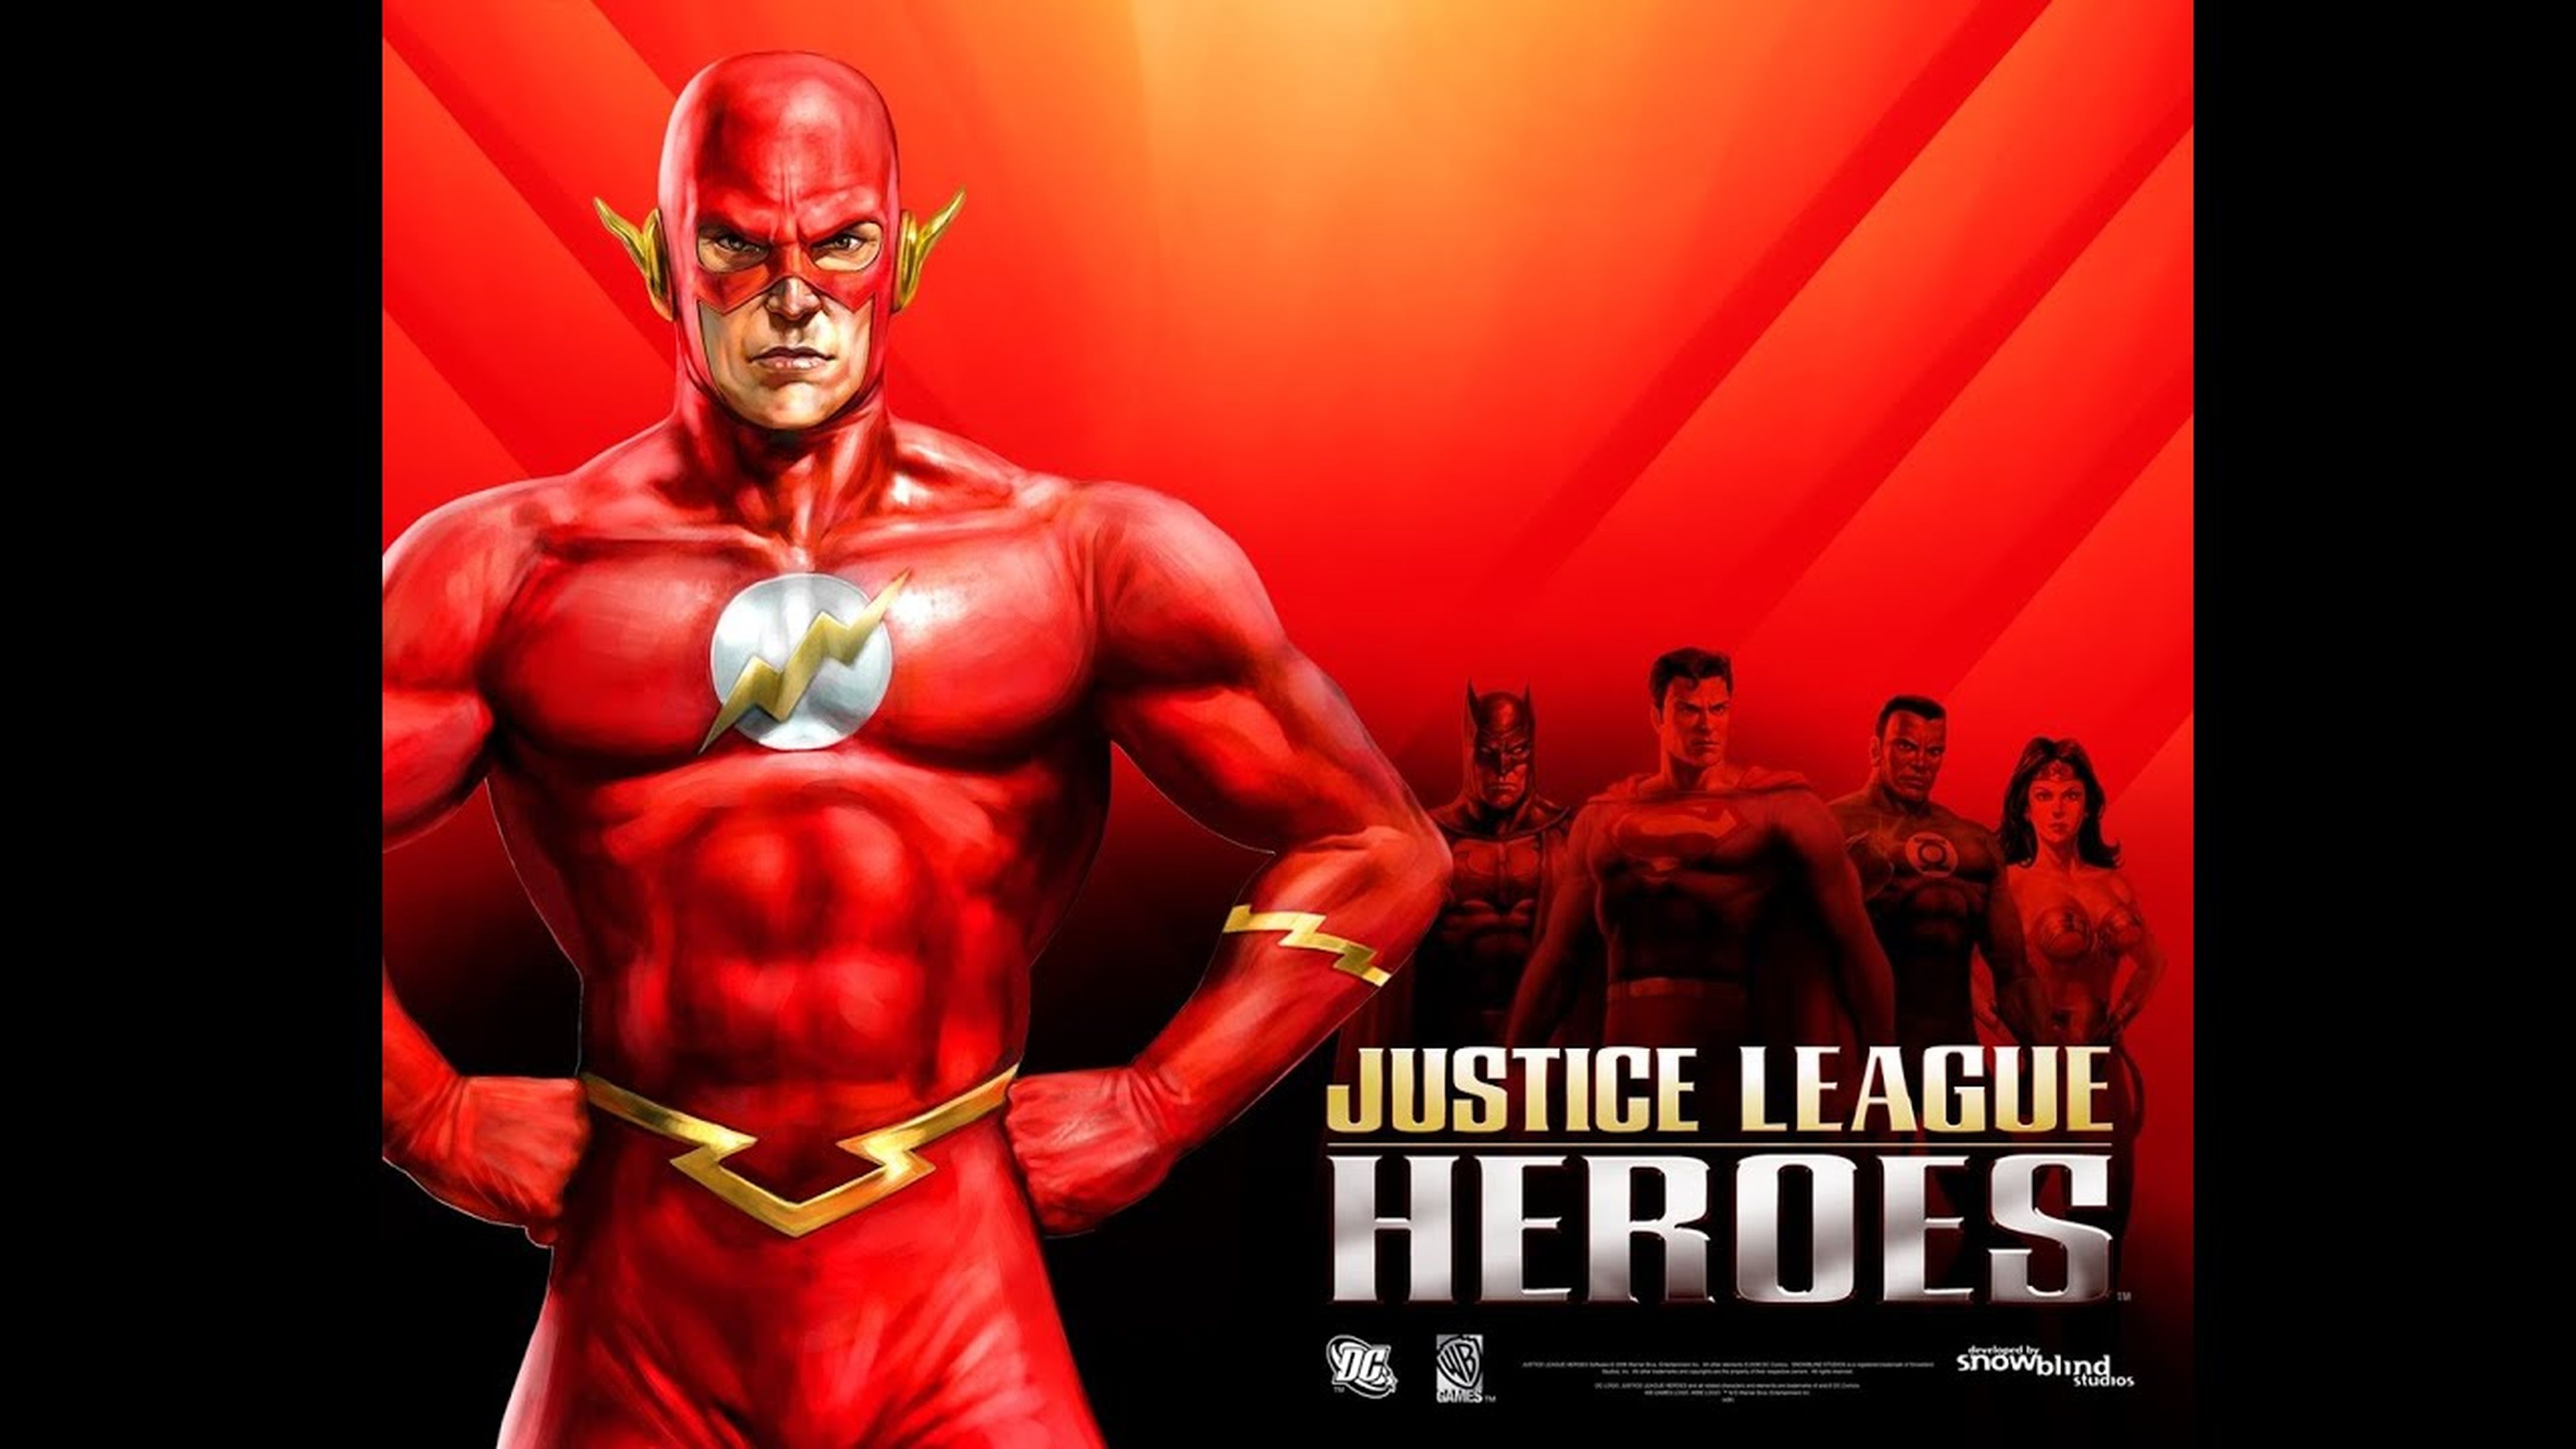 Justice League Heroes The Flash